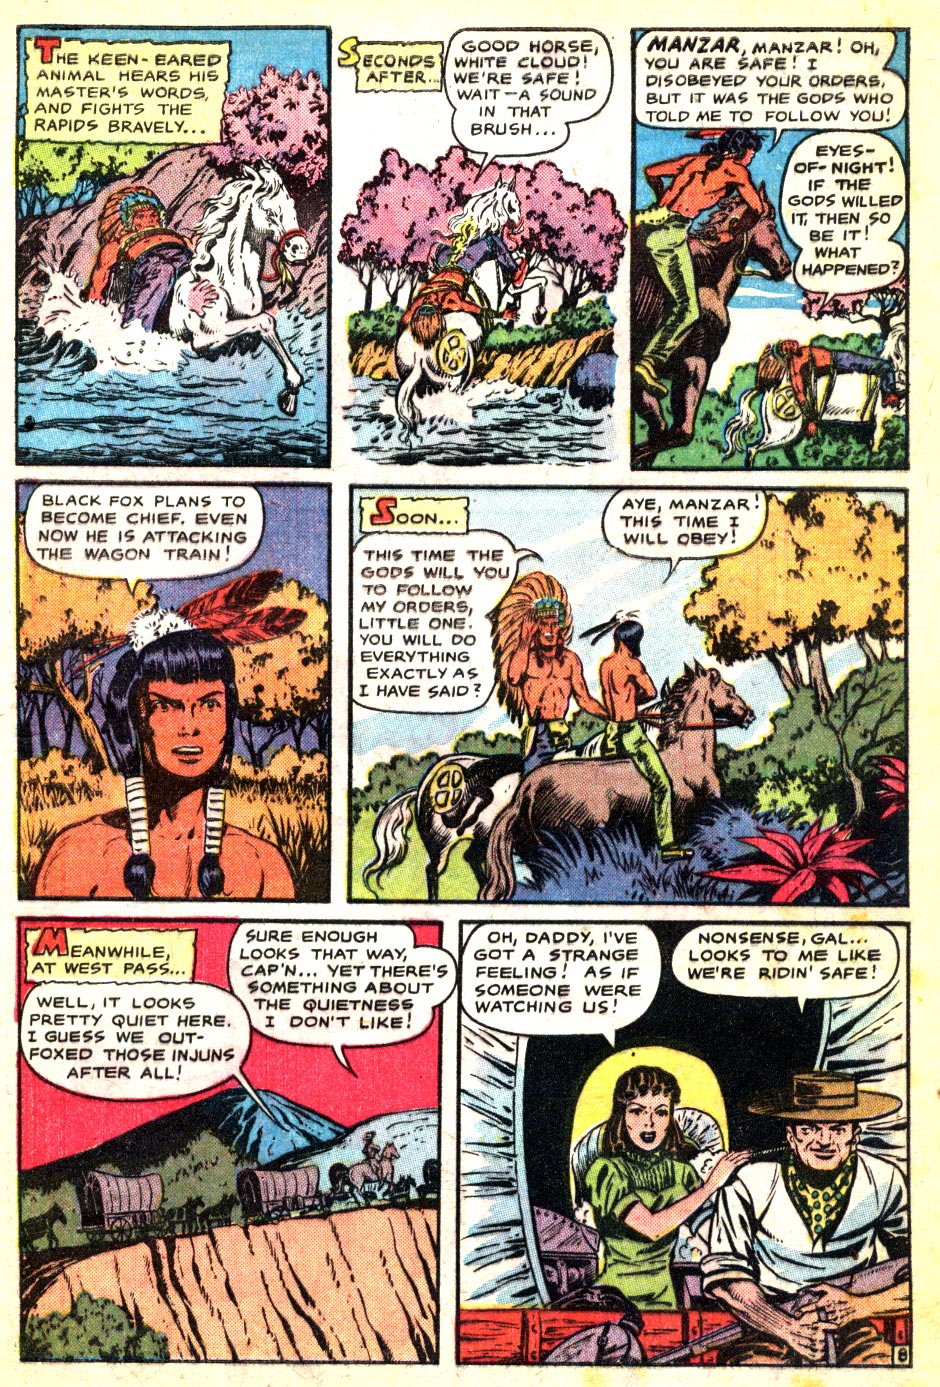 Read online Indians comic -  Issue #3 - 10